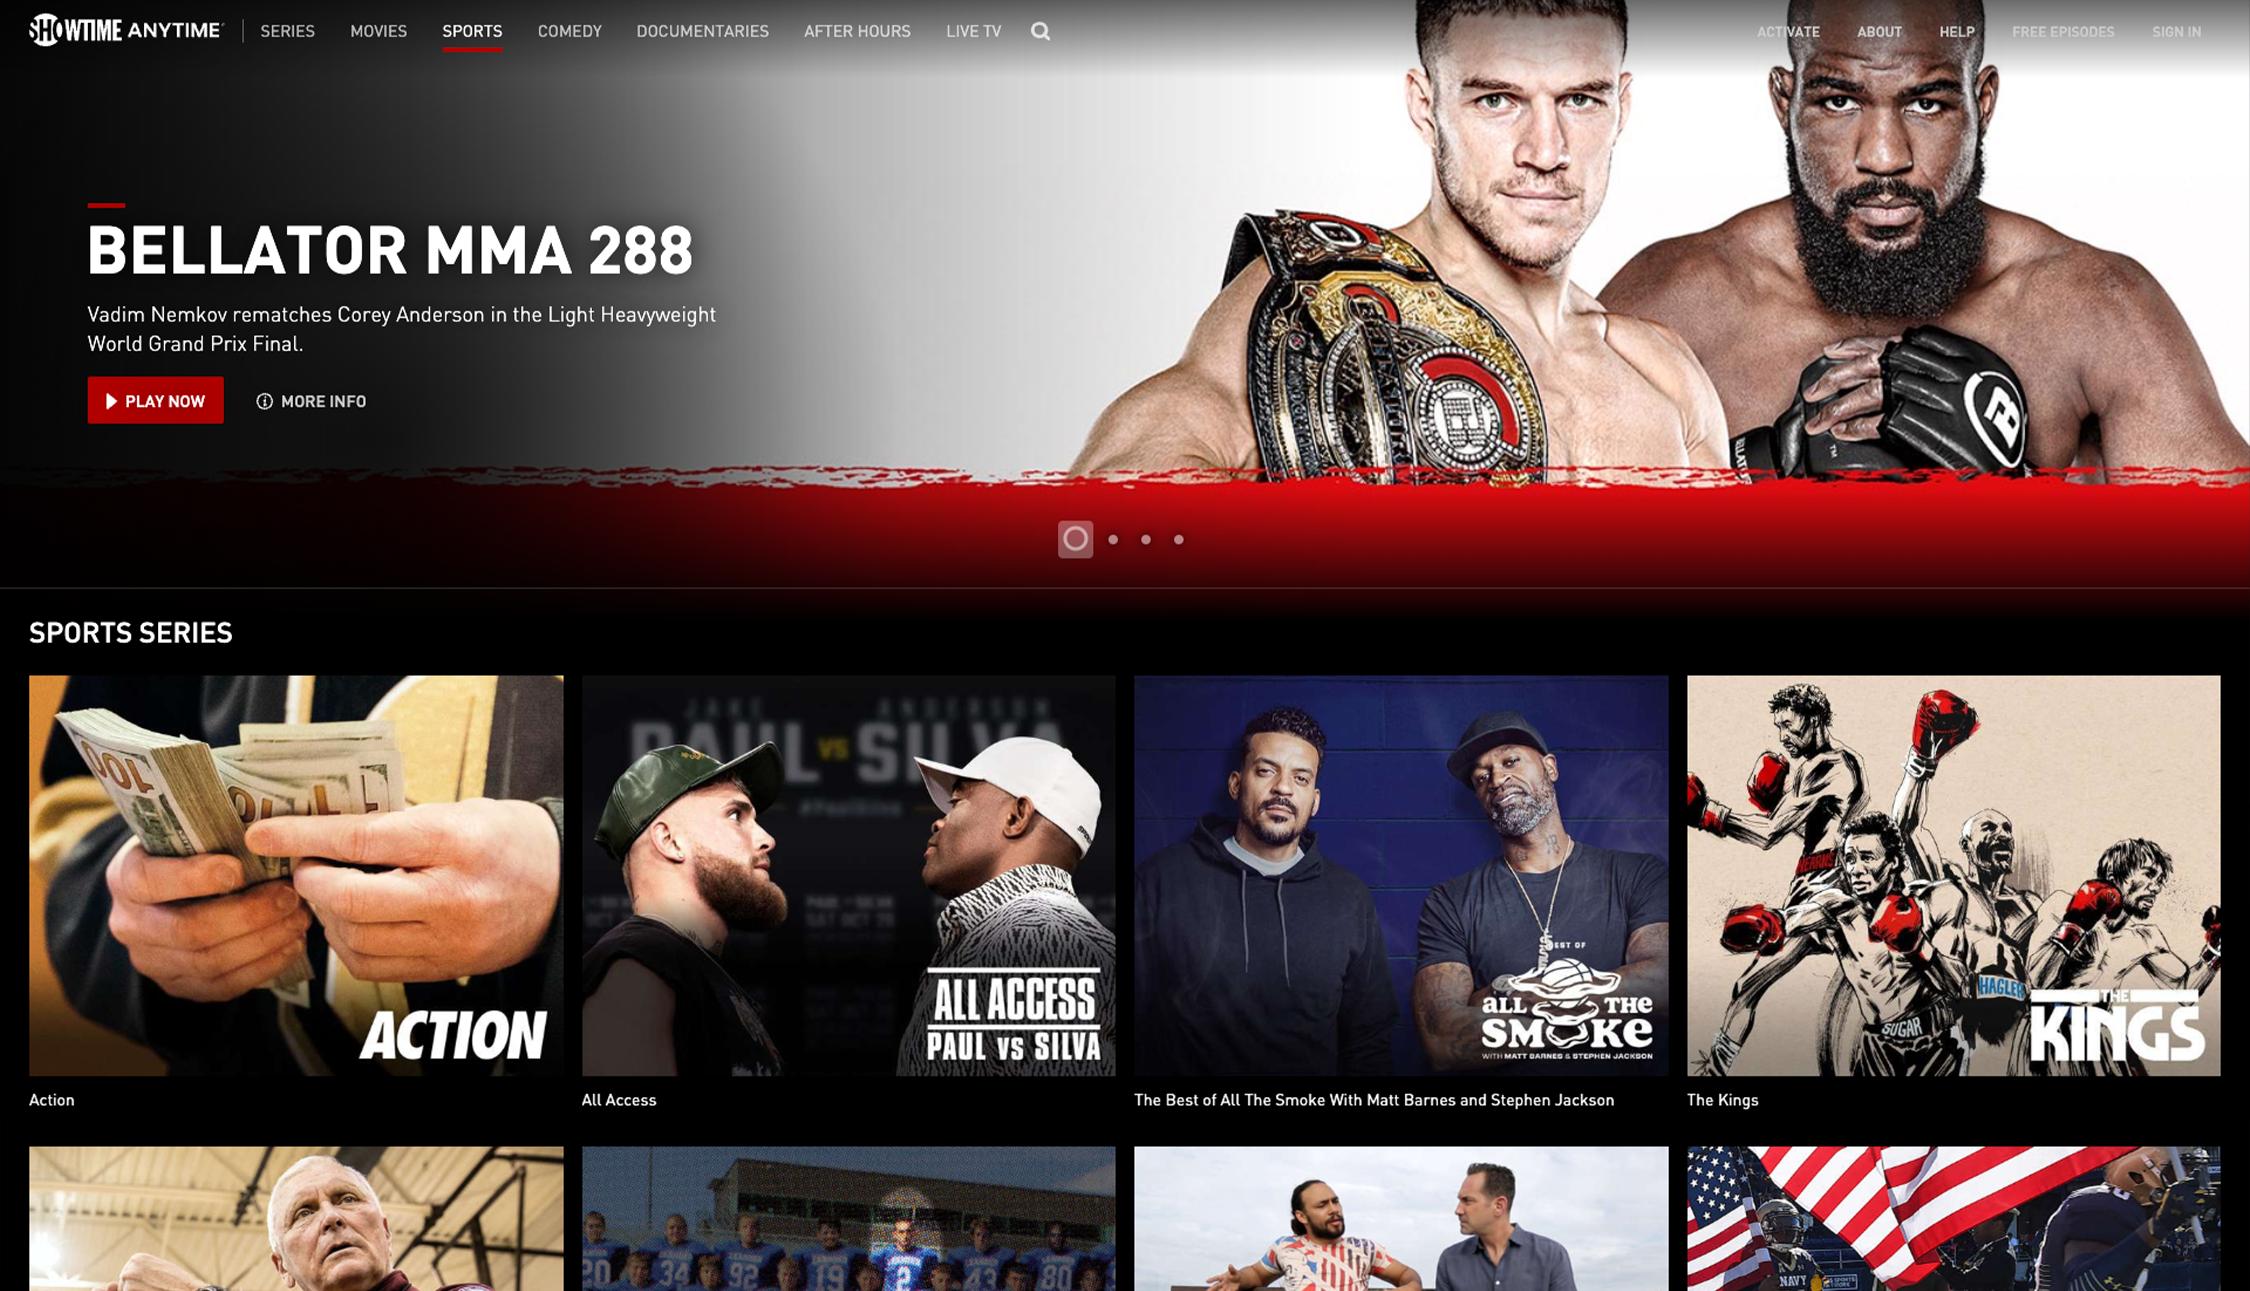 The SHOWTIME Anytime sports hub displays rows of sports-themed content with a banner of the next Bellator MMA event at the top.